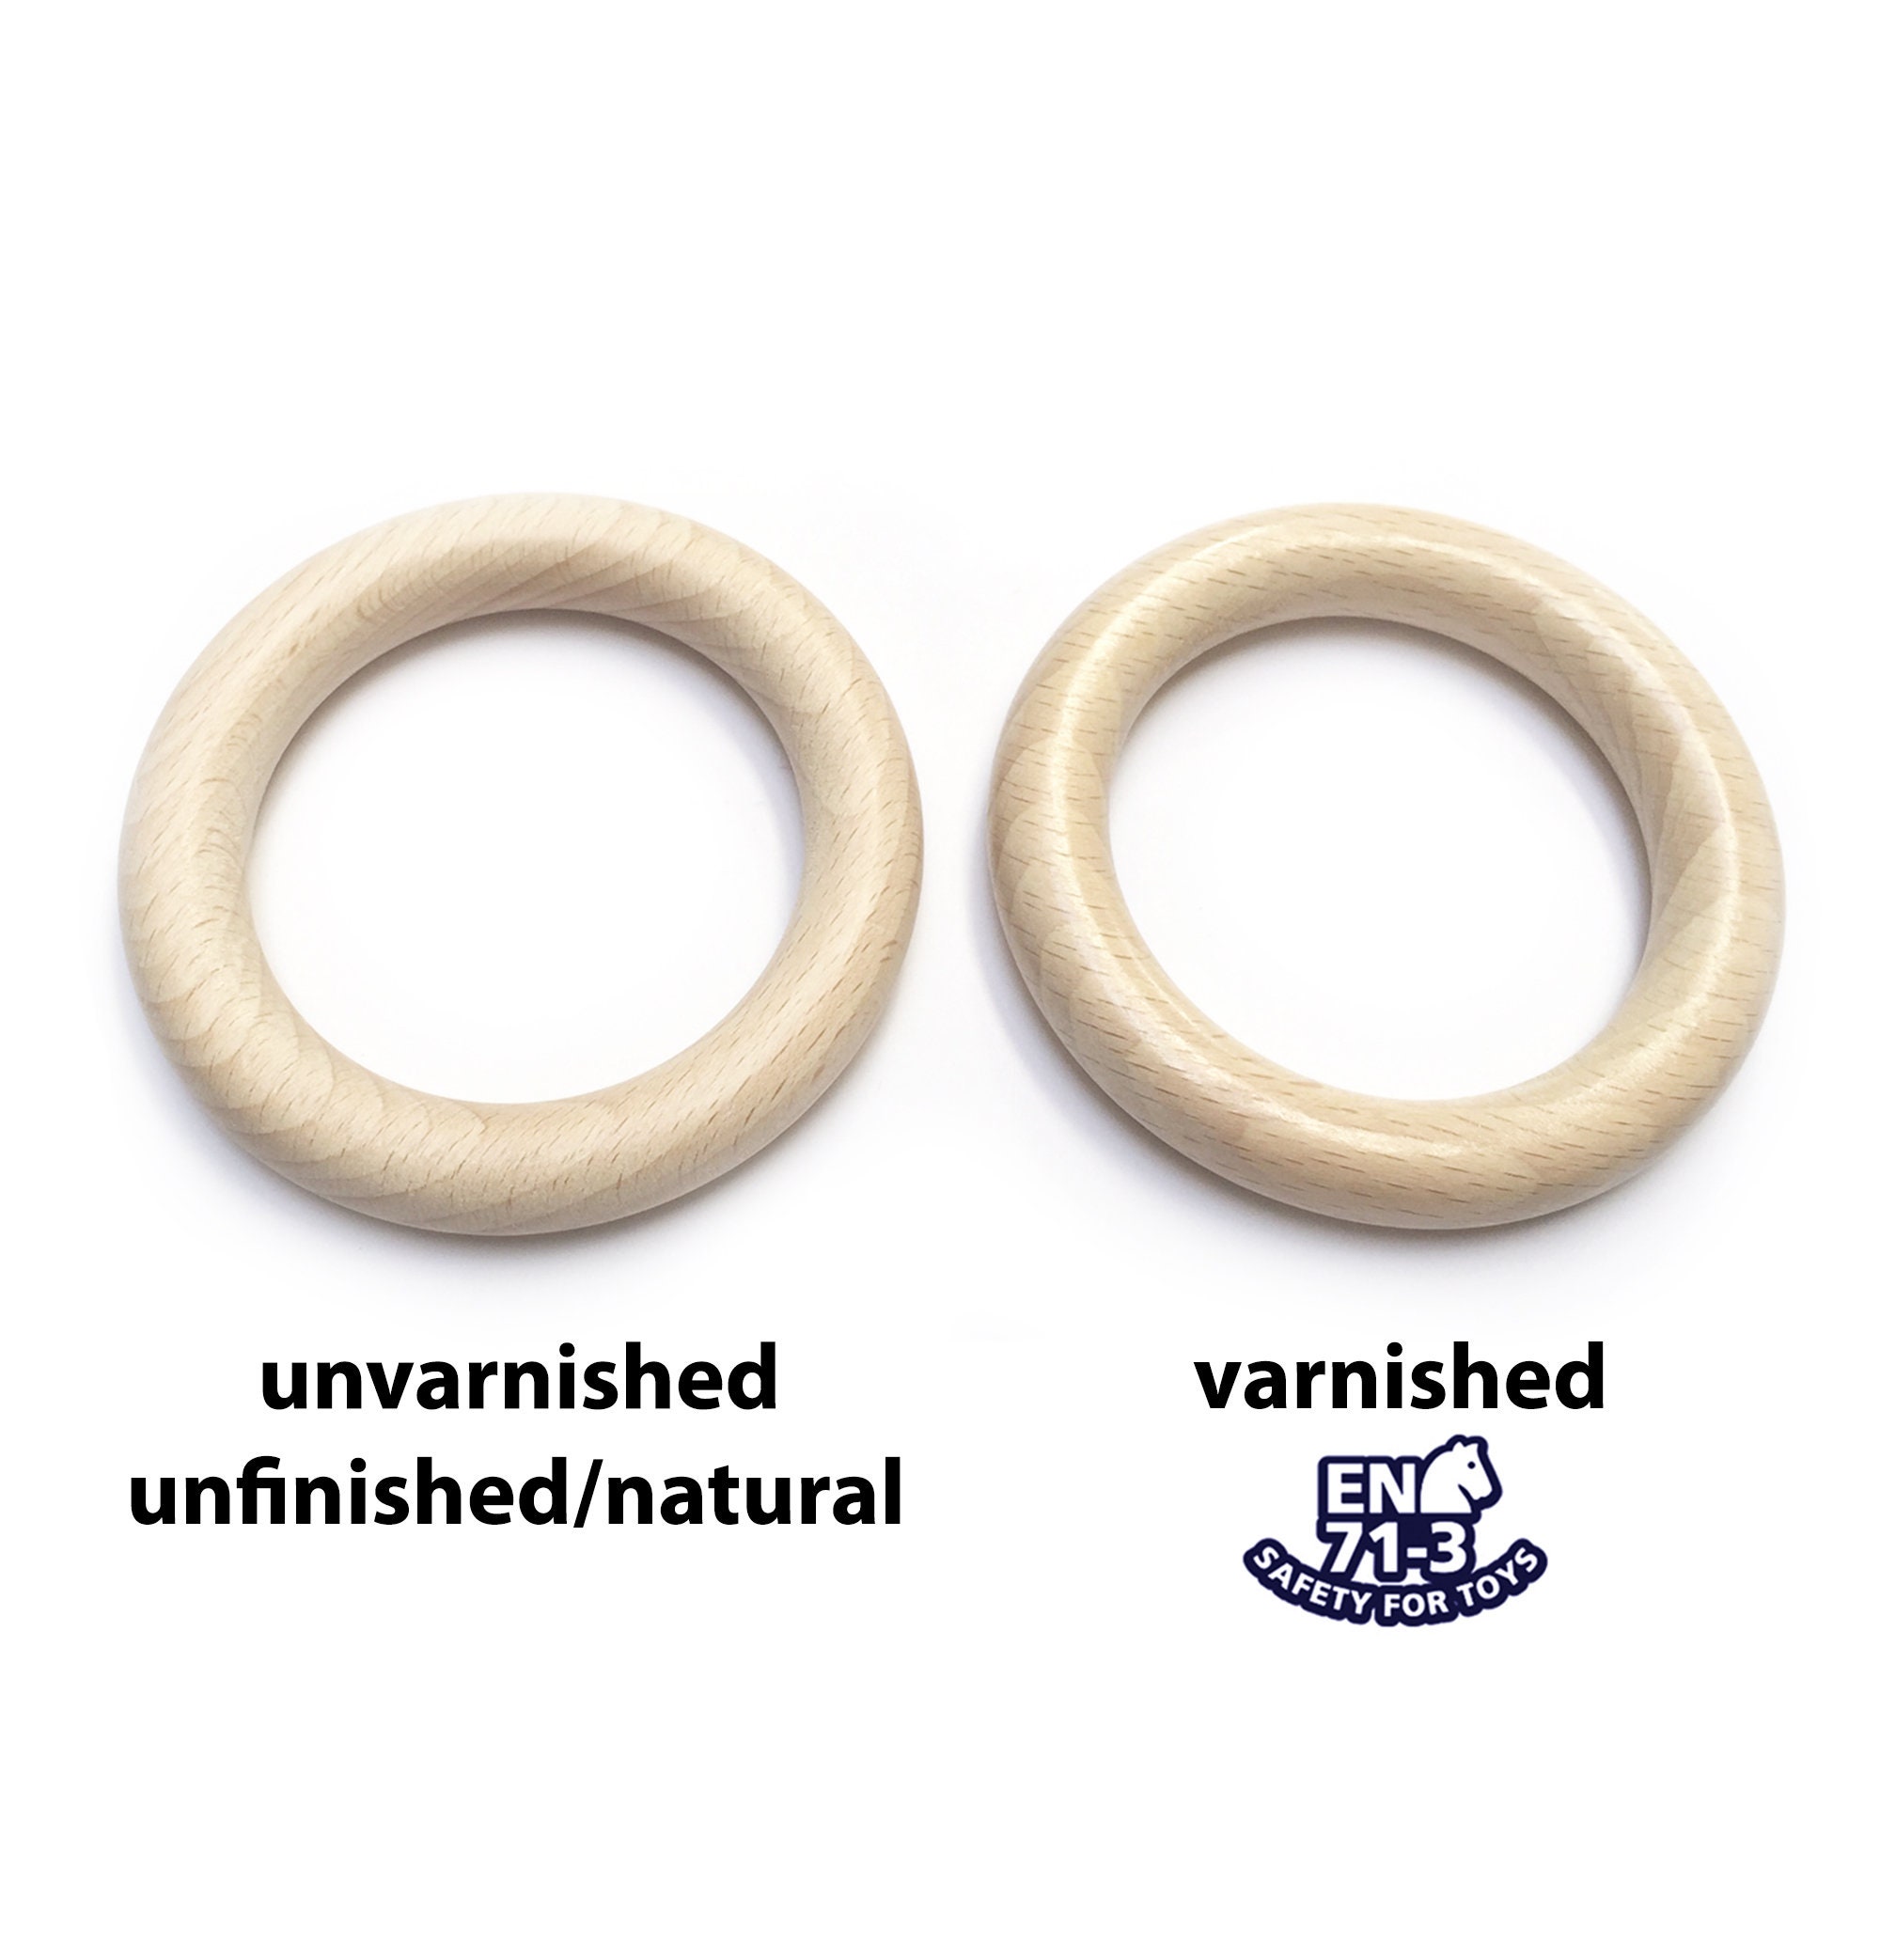 Simple Wooden Rings. - The Merrythought